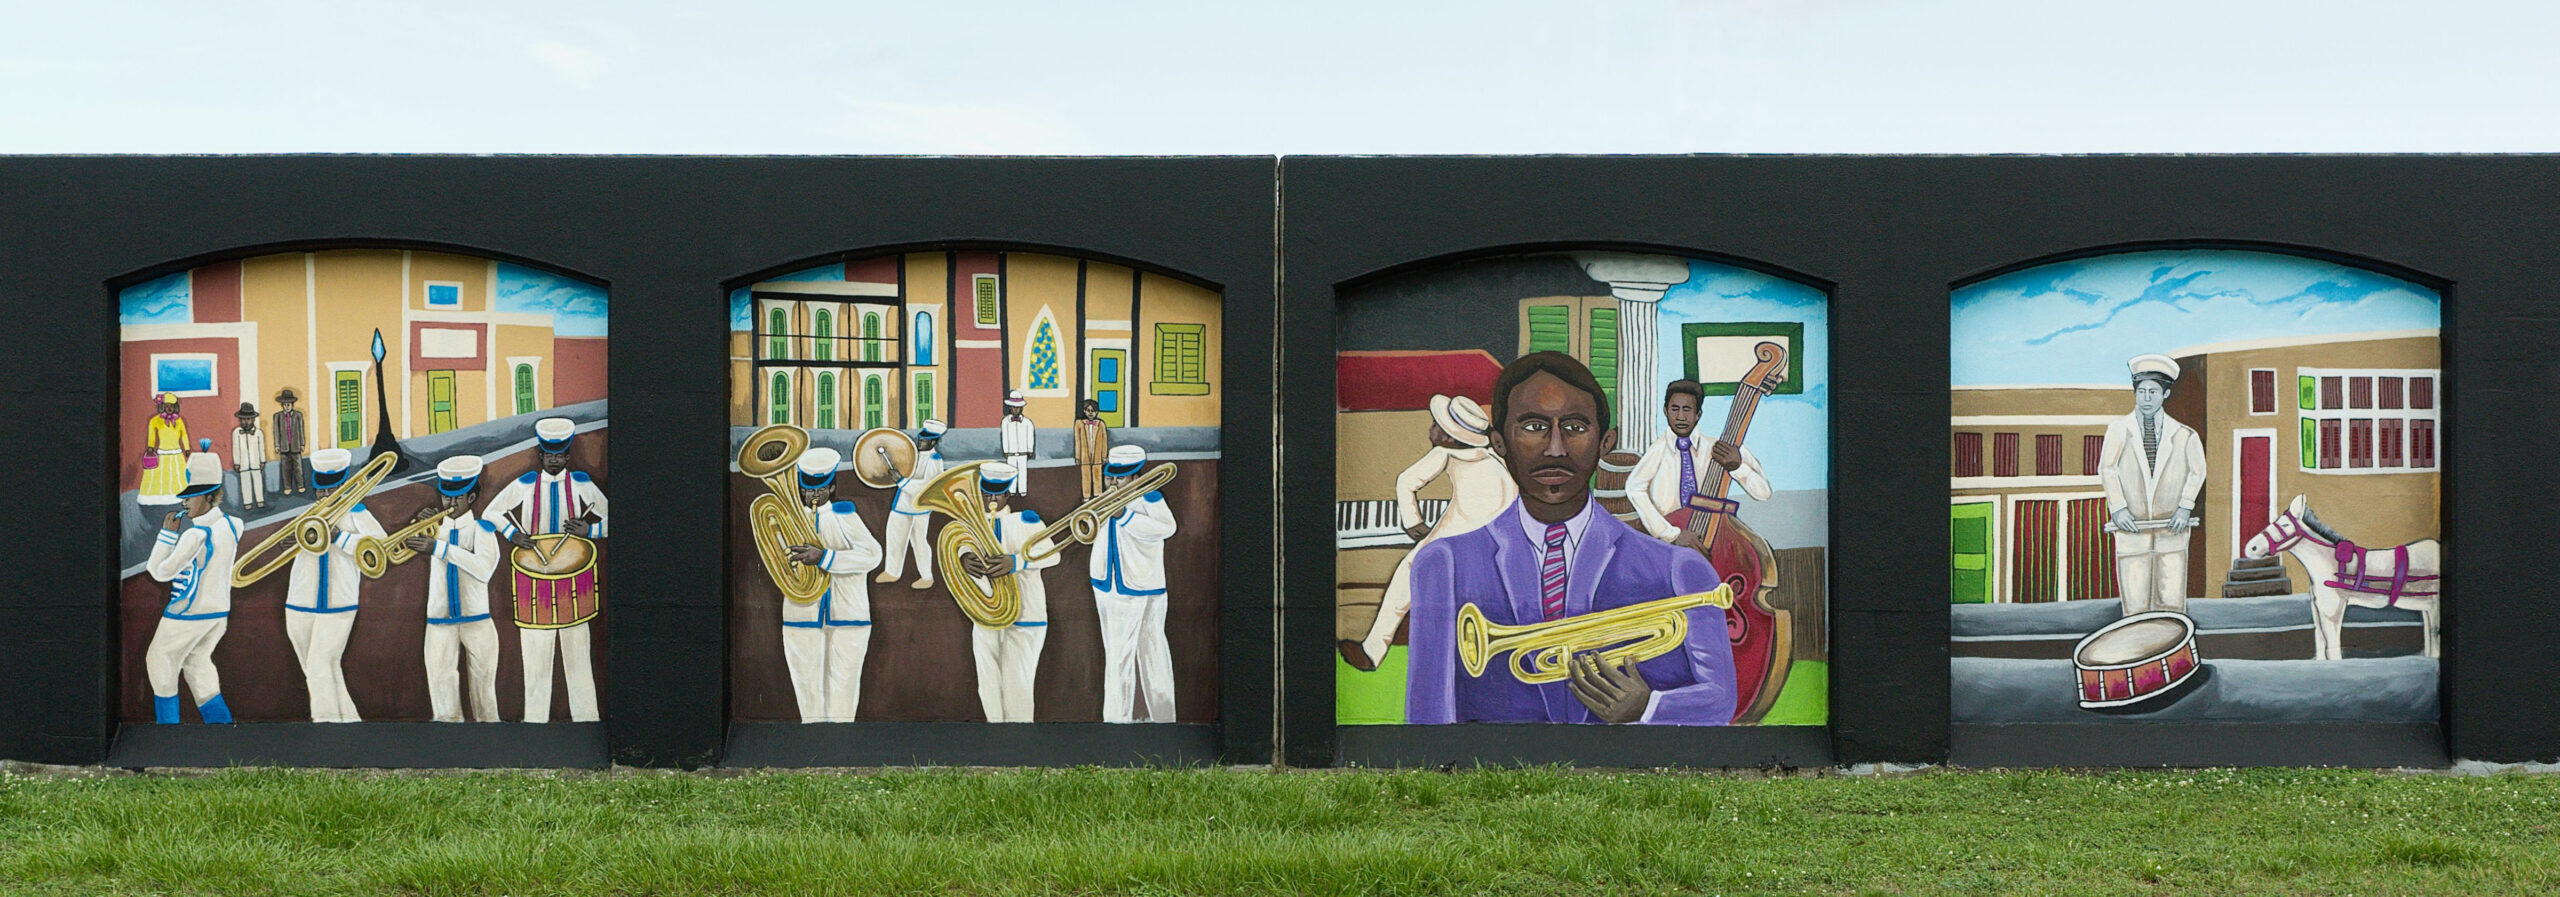 Tchoupitoulas Street Floodwall Mural in New Orleans